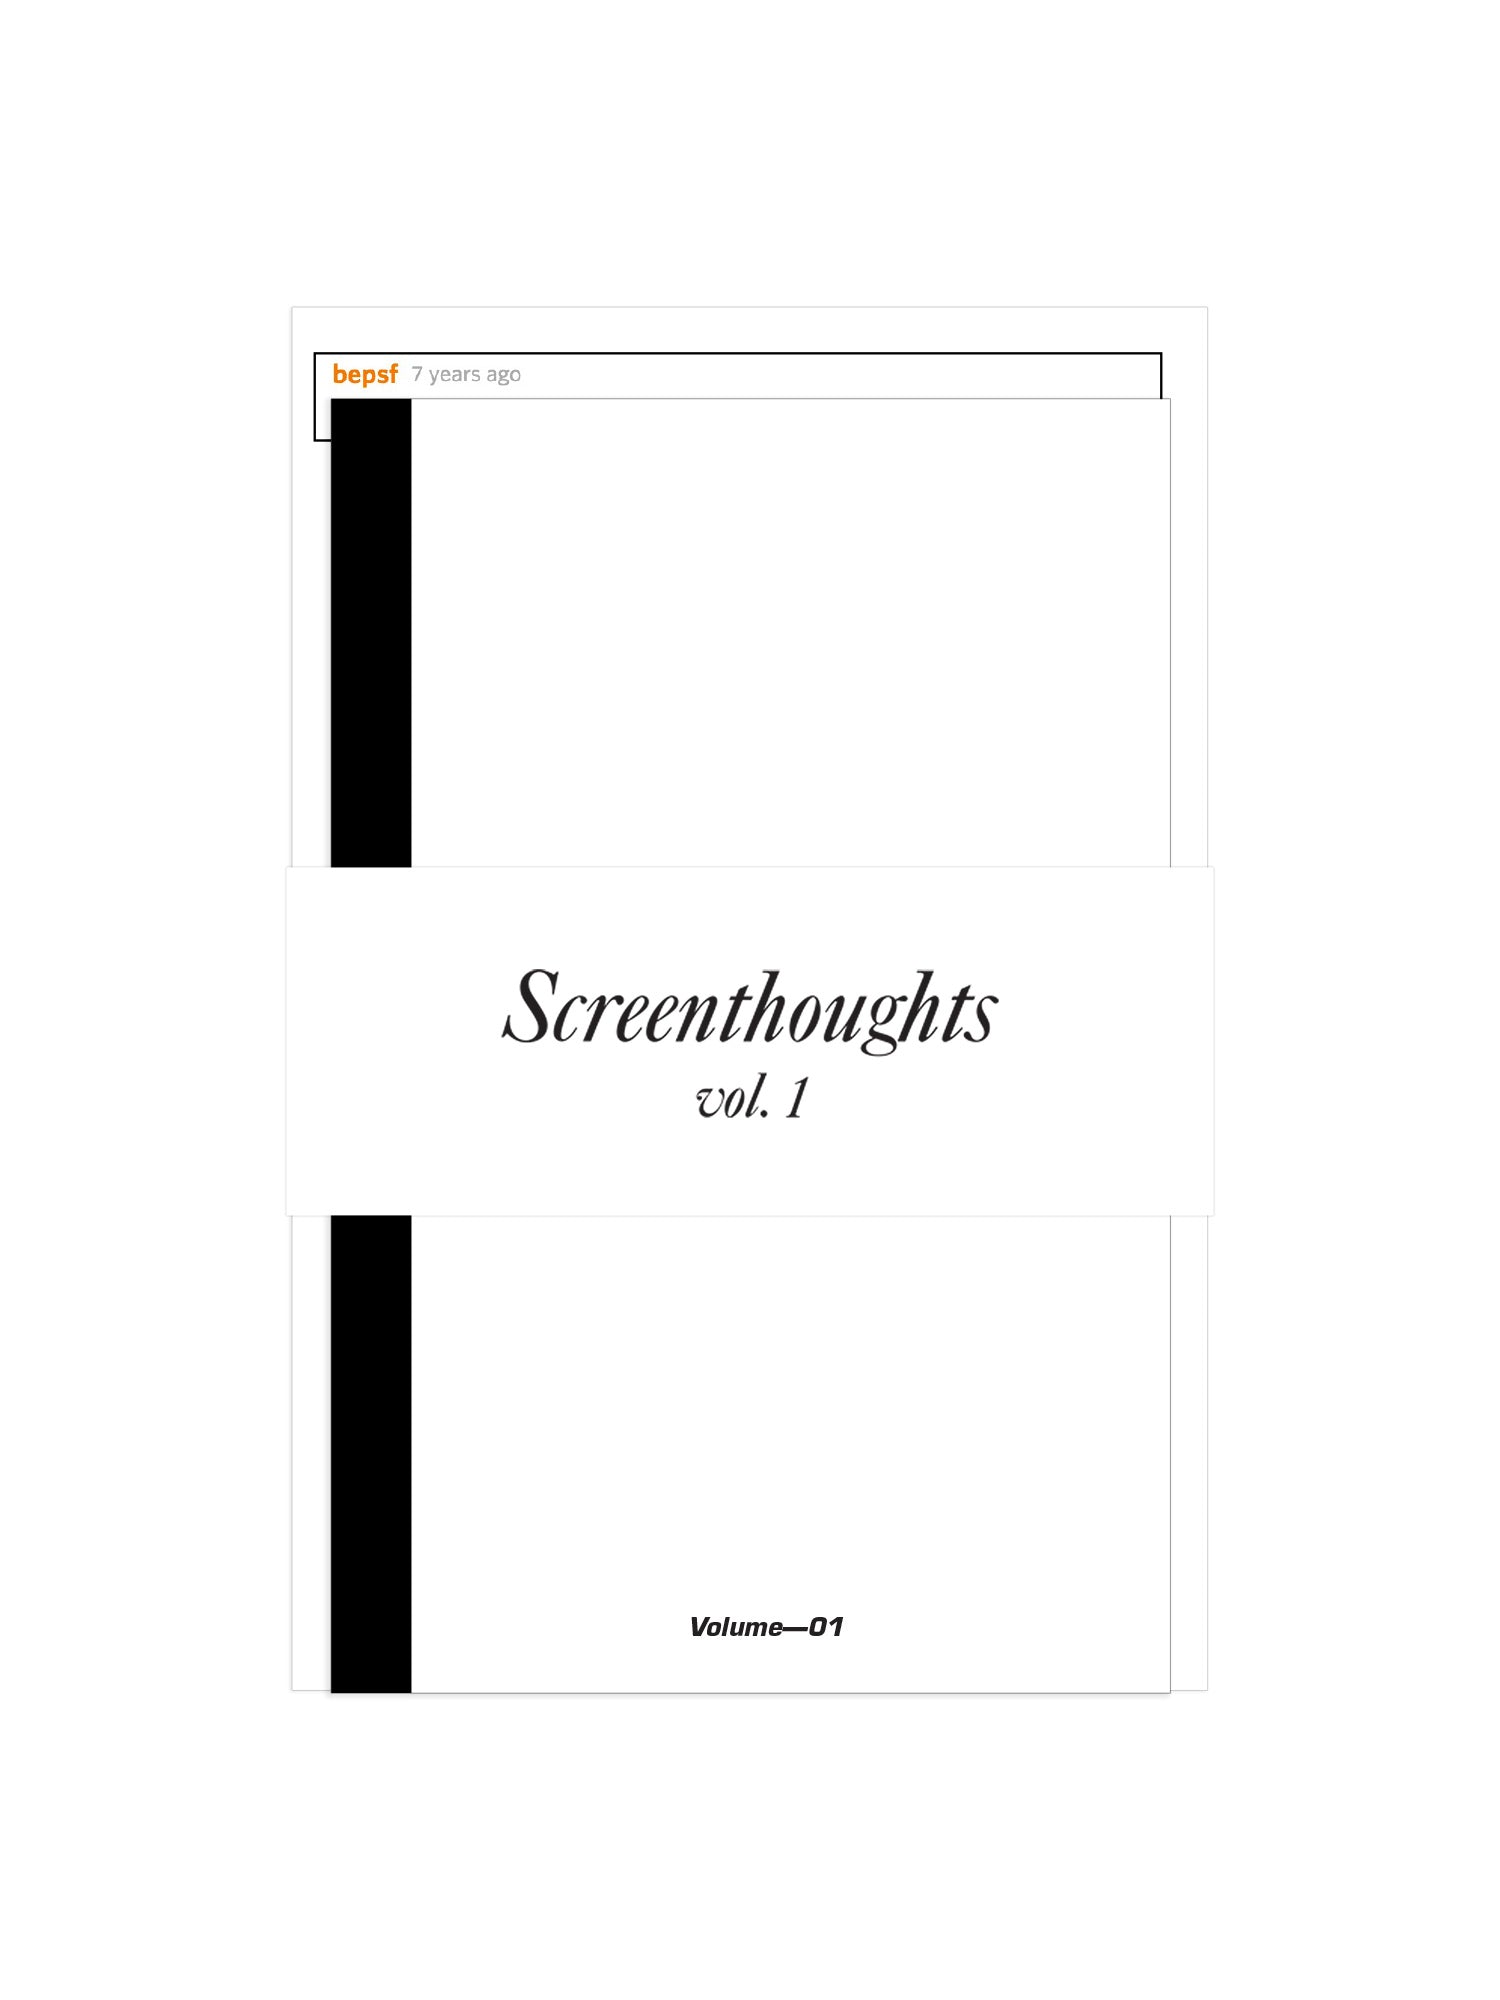 Screenthoughts, Volume 1